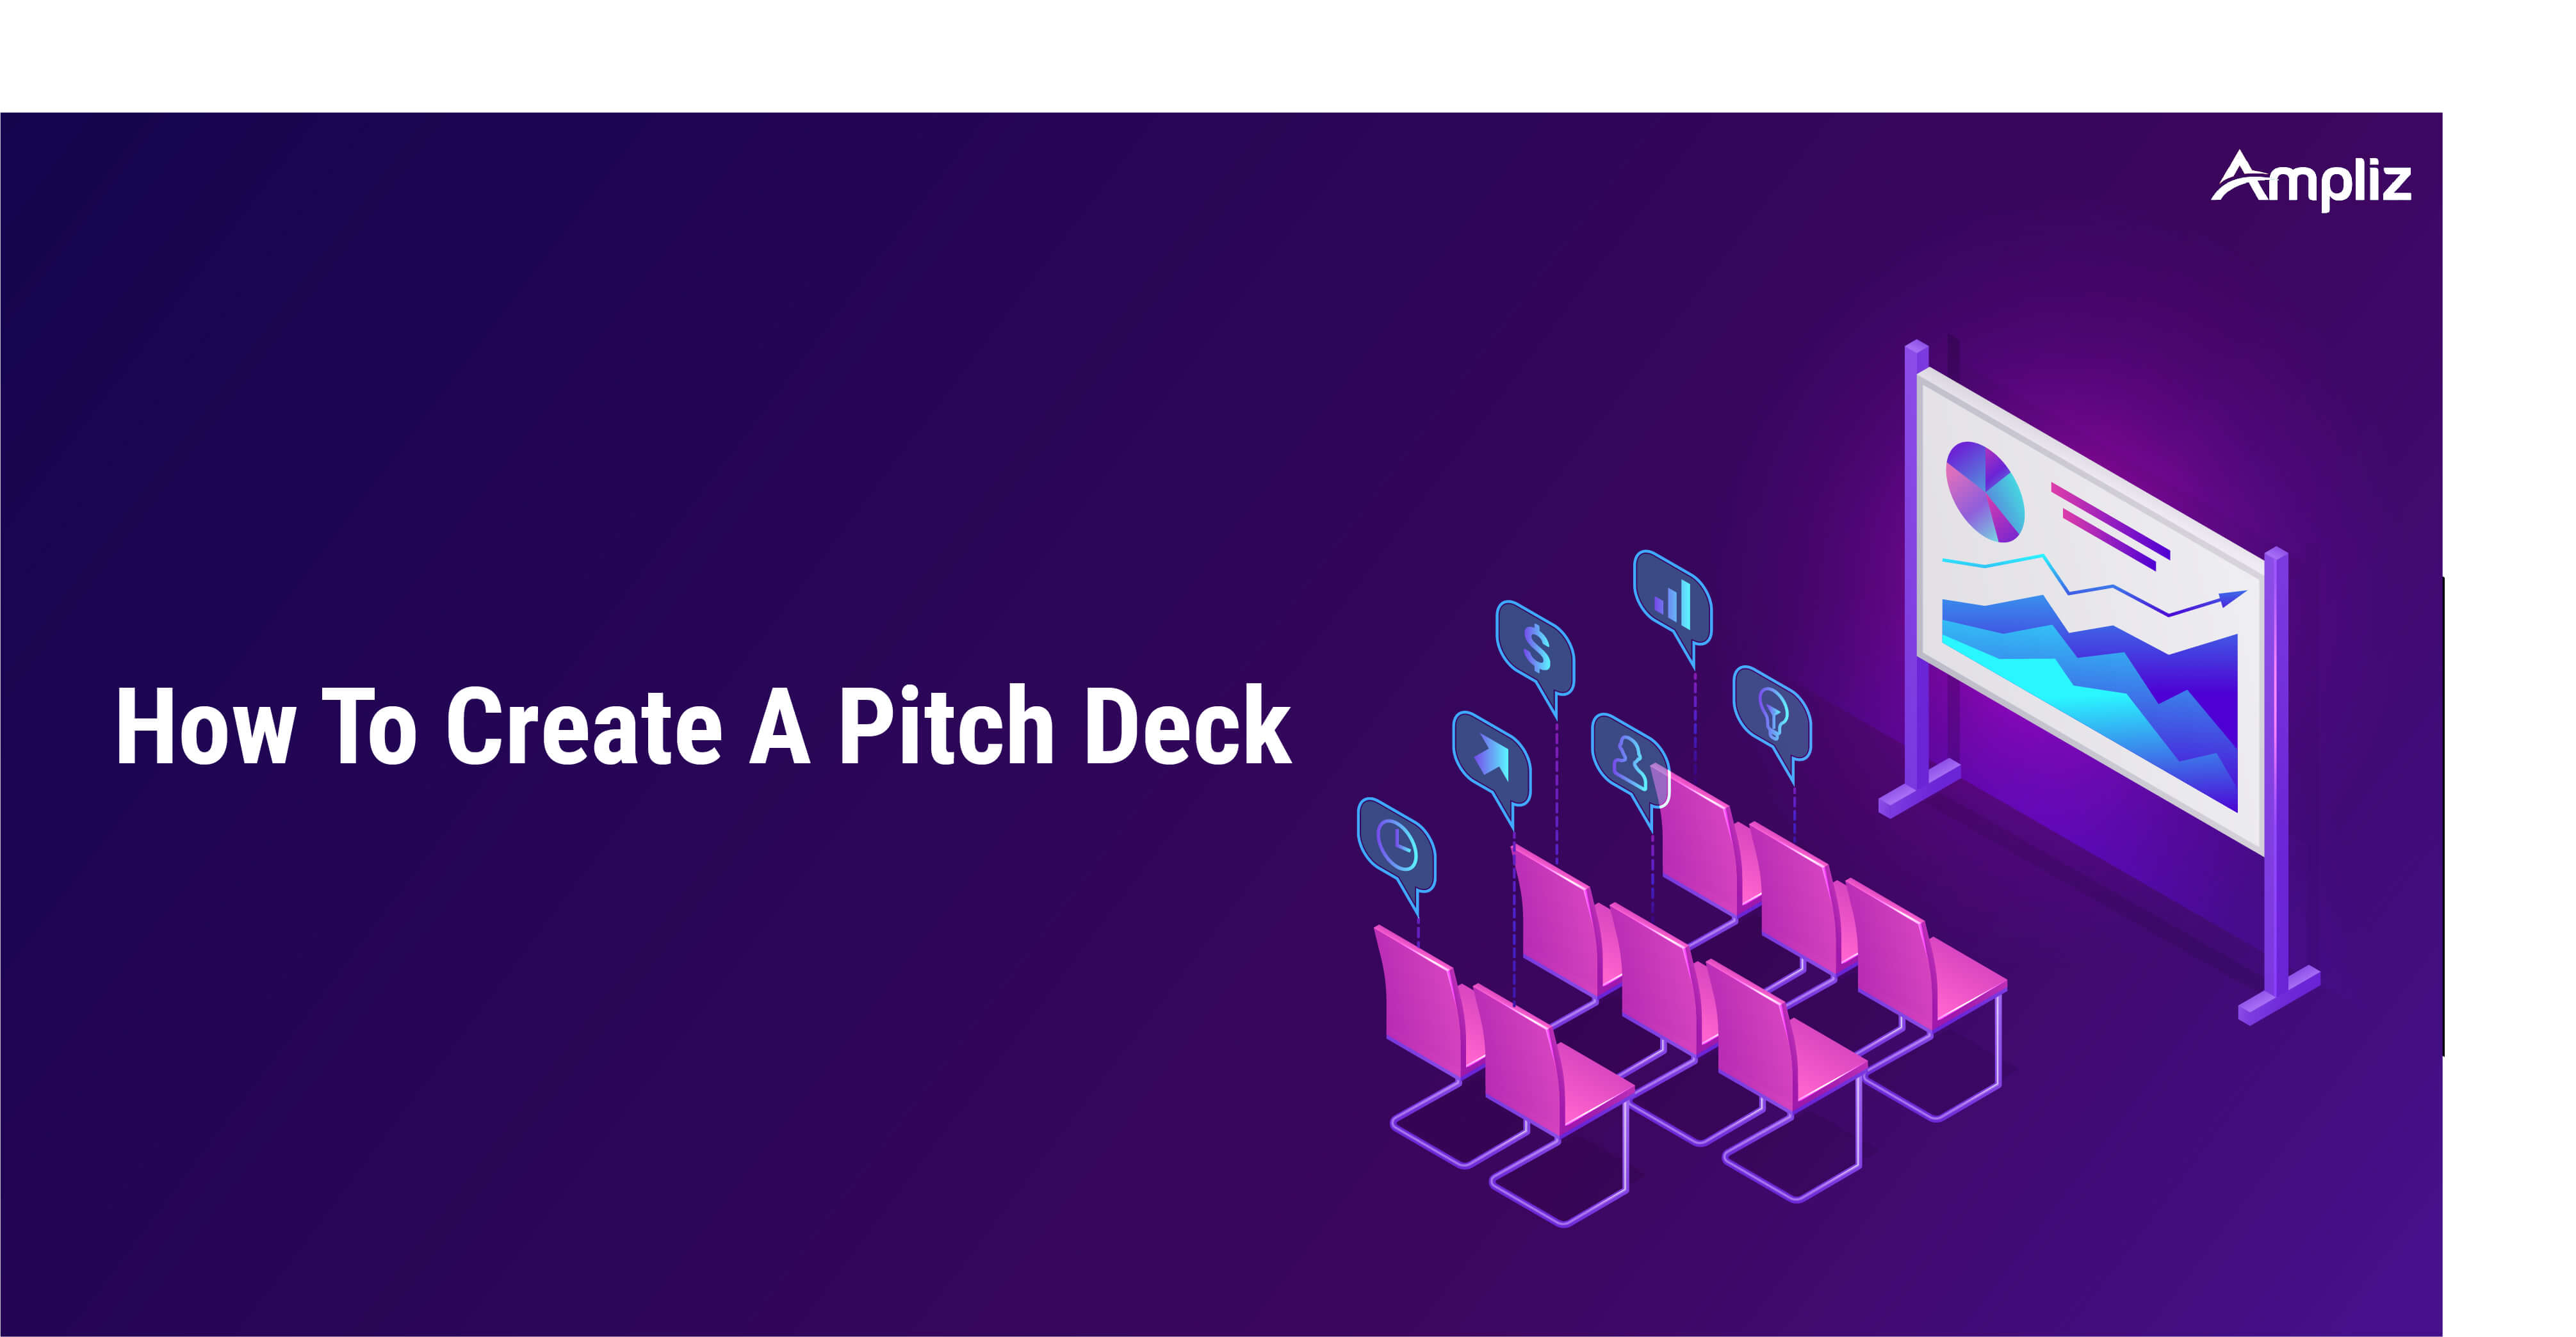 What is a pitch deck?